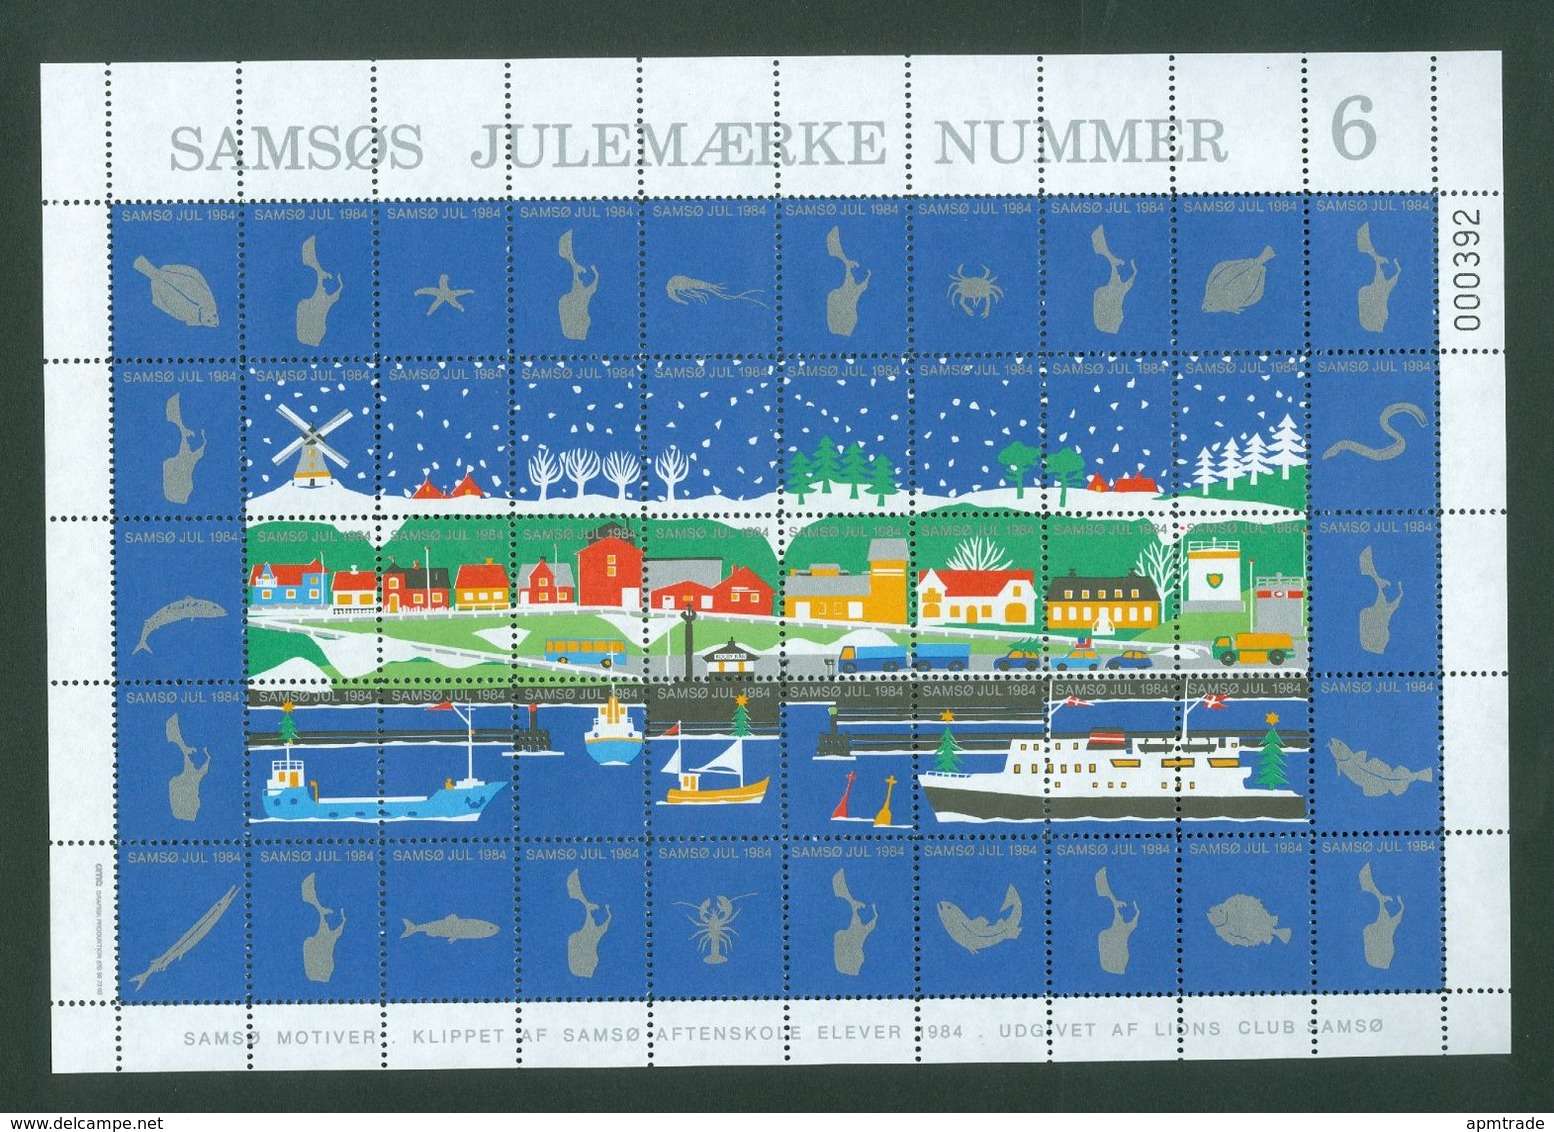 Denmark. Christmas Sheet Local Samso # 6 Lions Club 1984. Windmill,Ferry,Cars - Feuilles Complètes Et Multiples